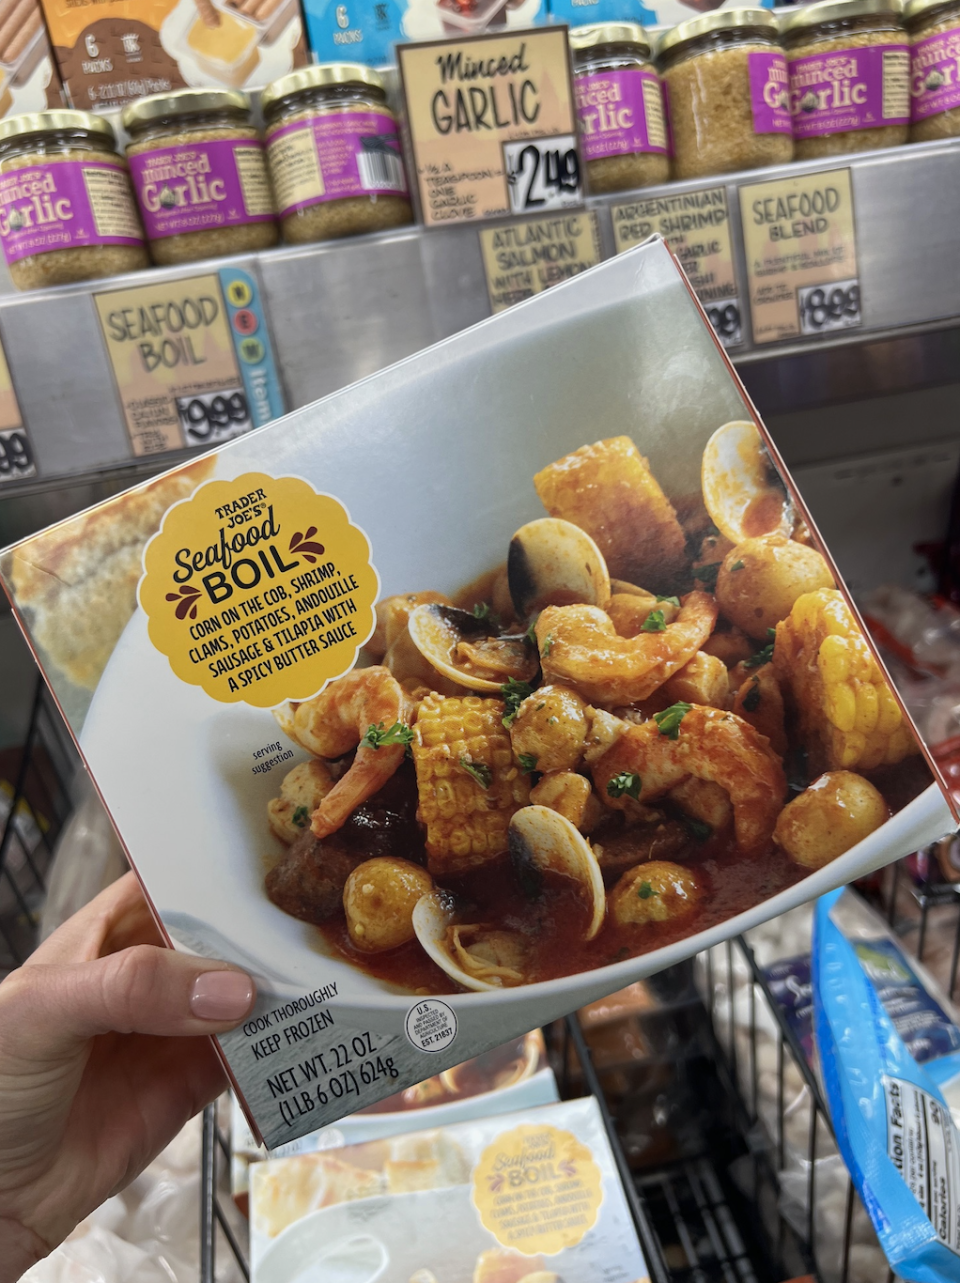 A hand holding a Trader Joe's Seafood Boil package with shrimp, corn, potatoes, andouille sausage, and seafood in a spicy butter sauce